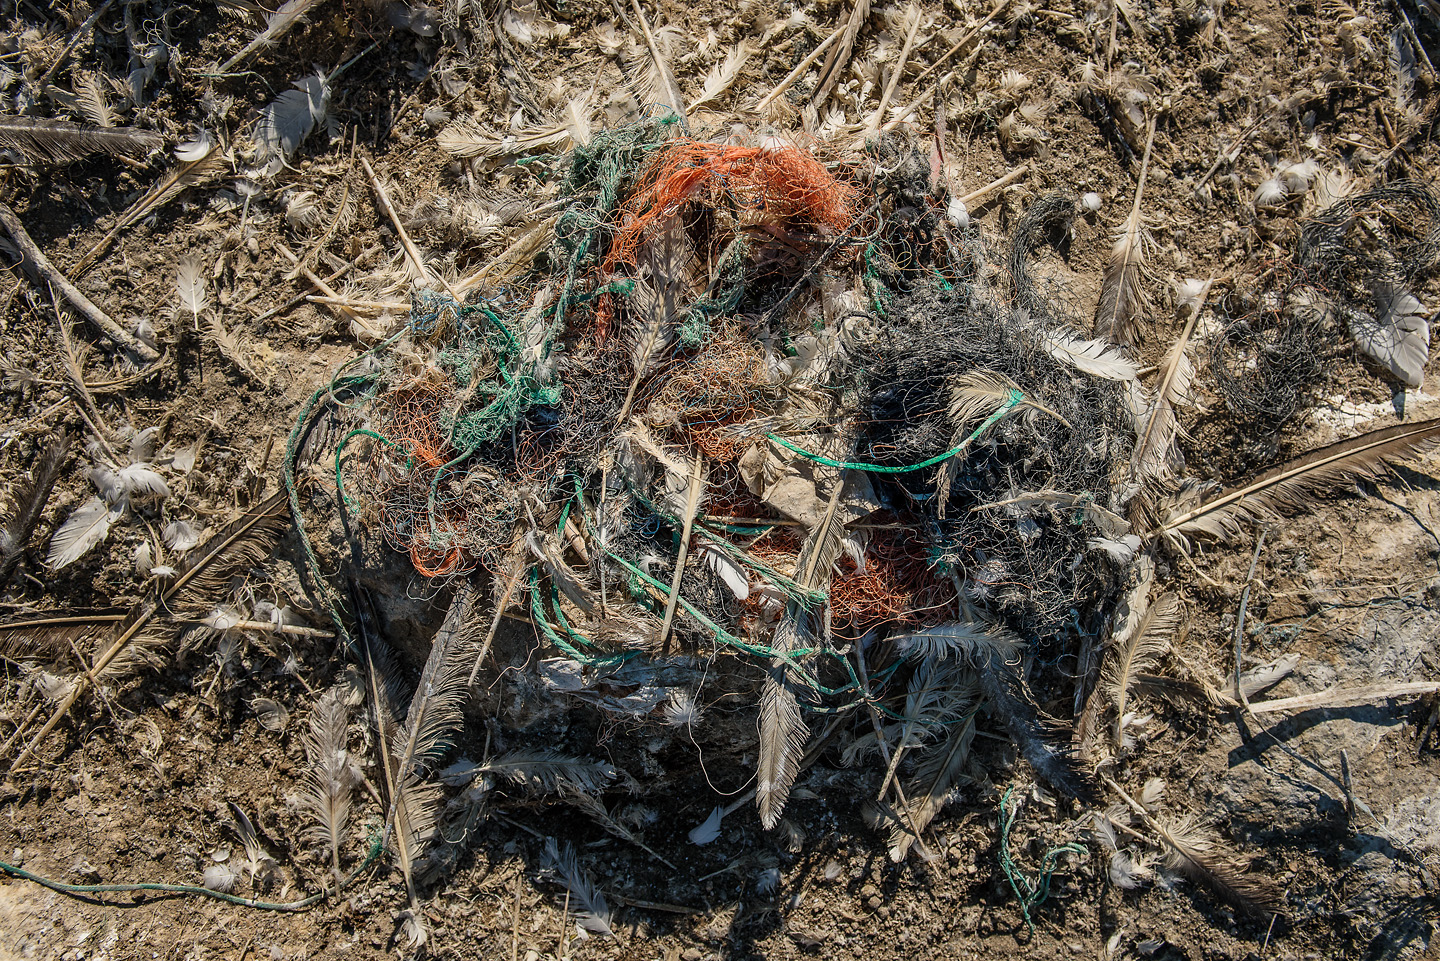  On average, a gannet’s nest on Grassholm contains half a kilogram of plastic, but this ranges to well over a kilogram. Synthetic fibres can make up the majority of the nest, so removal is not an option 